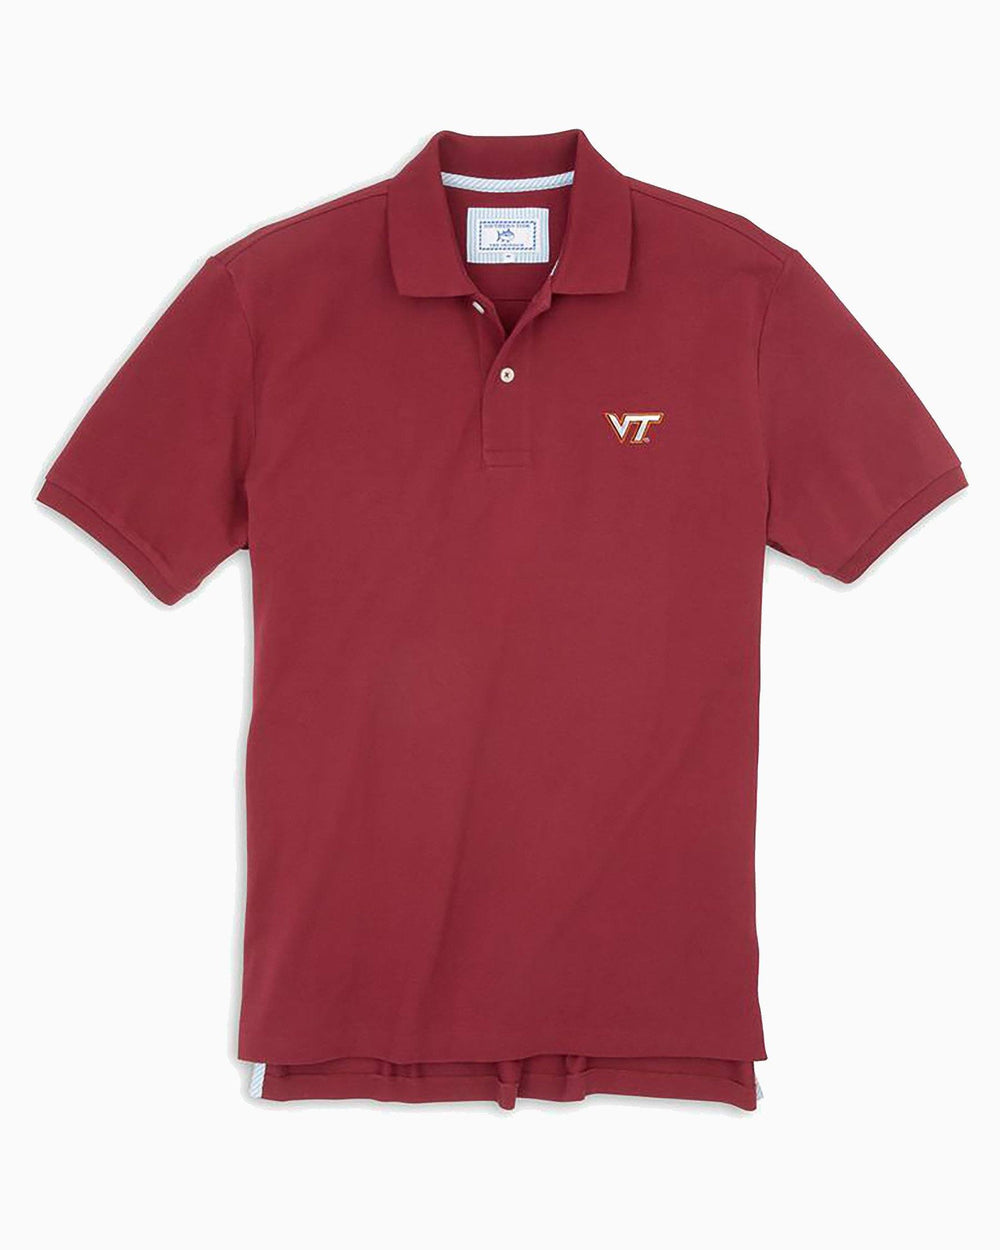 The front view of the Men's Red Virginia Tech Hokies Pique Polo Shirt by Southern Tide - Chianti